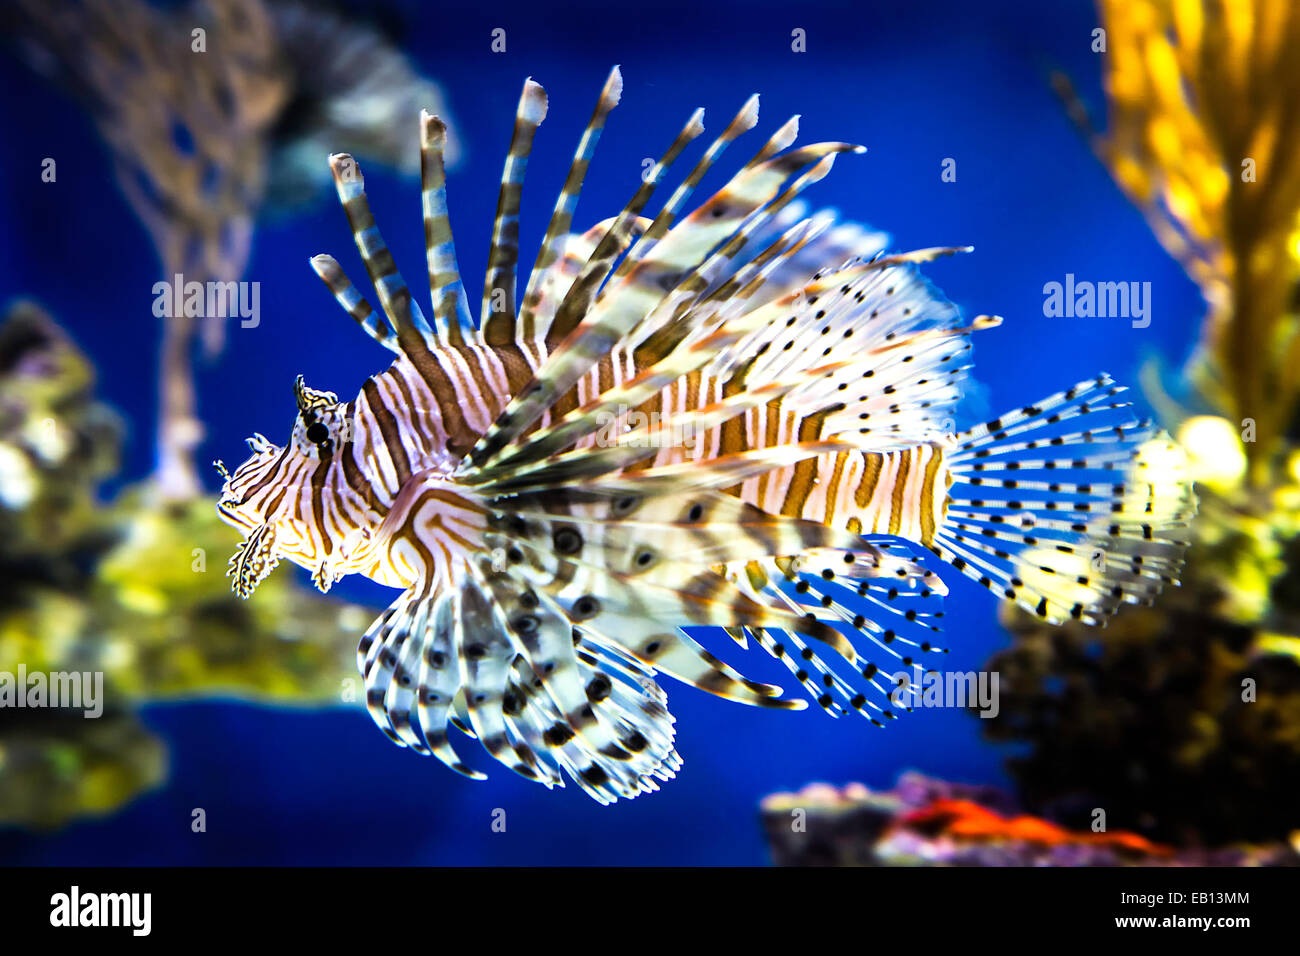 A single tiger fish swims through a kelp forest at the Monterey Bay Aquarium on Cannery Row, in Monterey, California, USA. Stock Photo